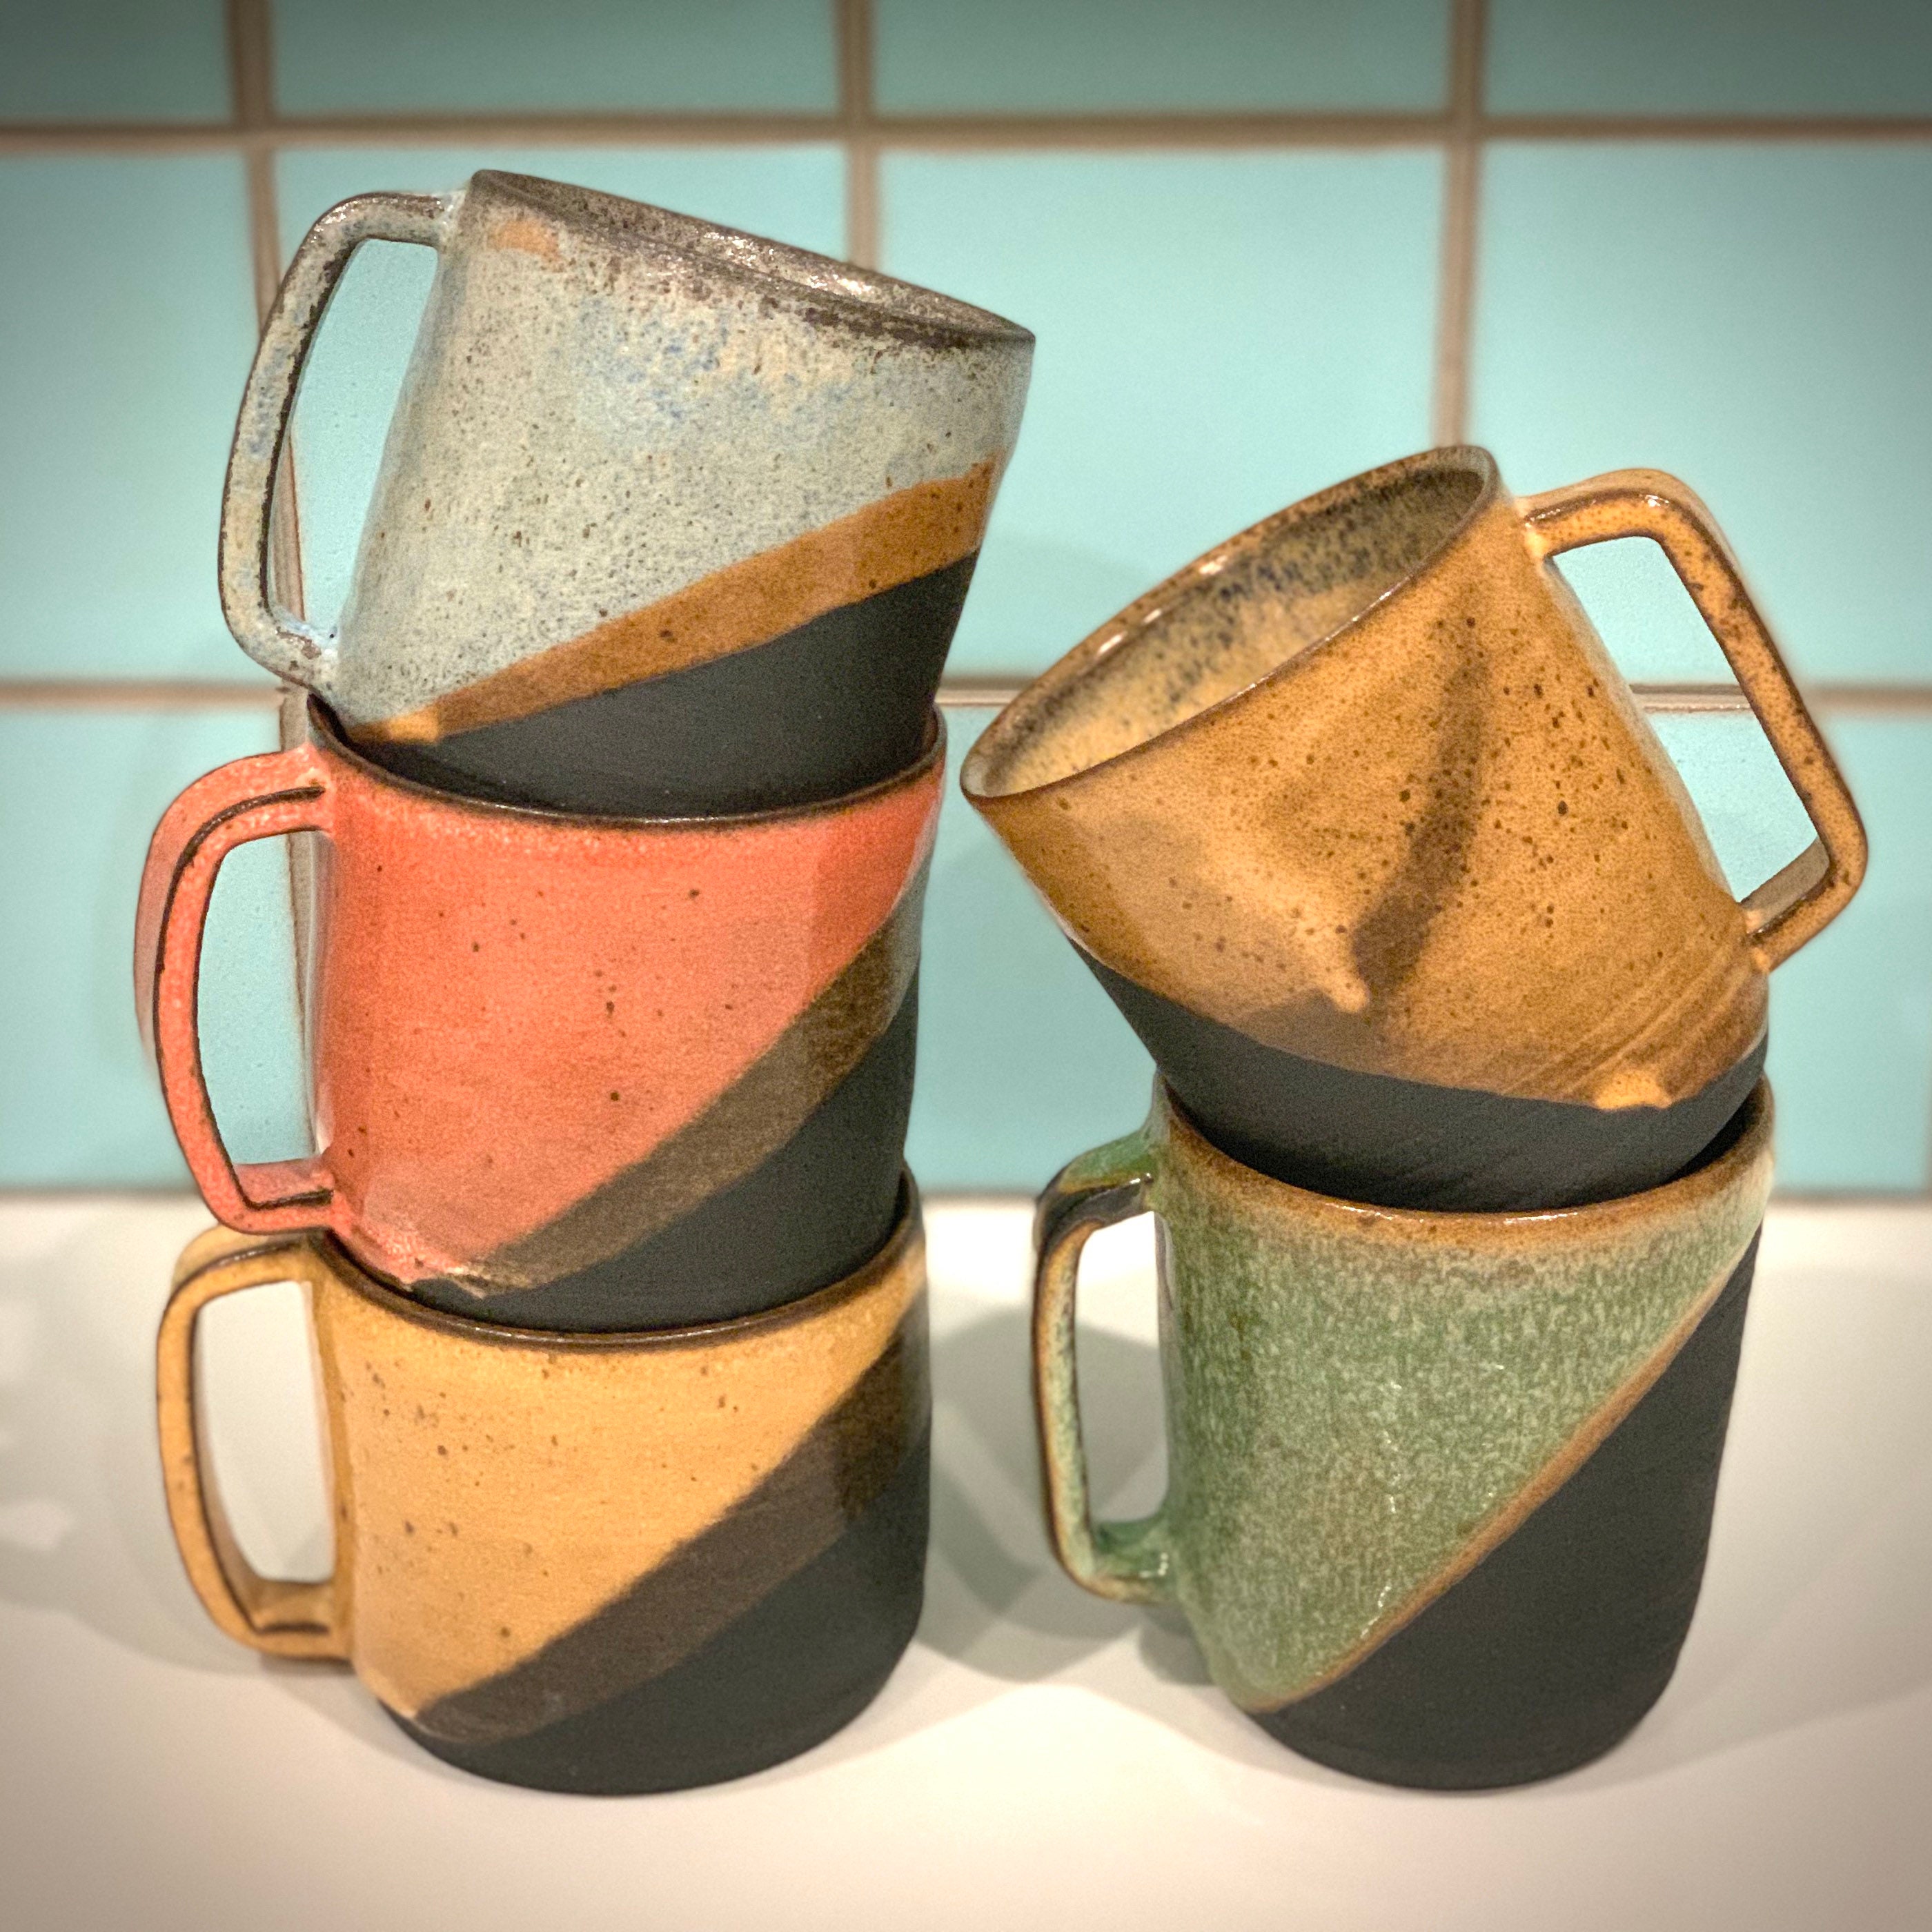 Set of Colorful Pottery Coffee Mugs, 10 oz – Mad About Pottery